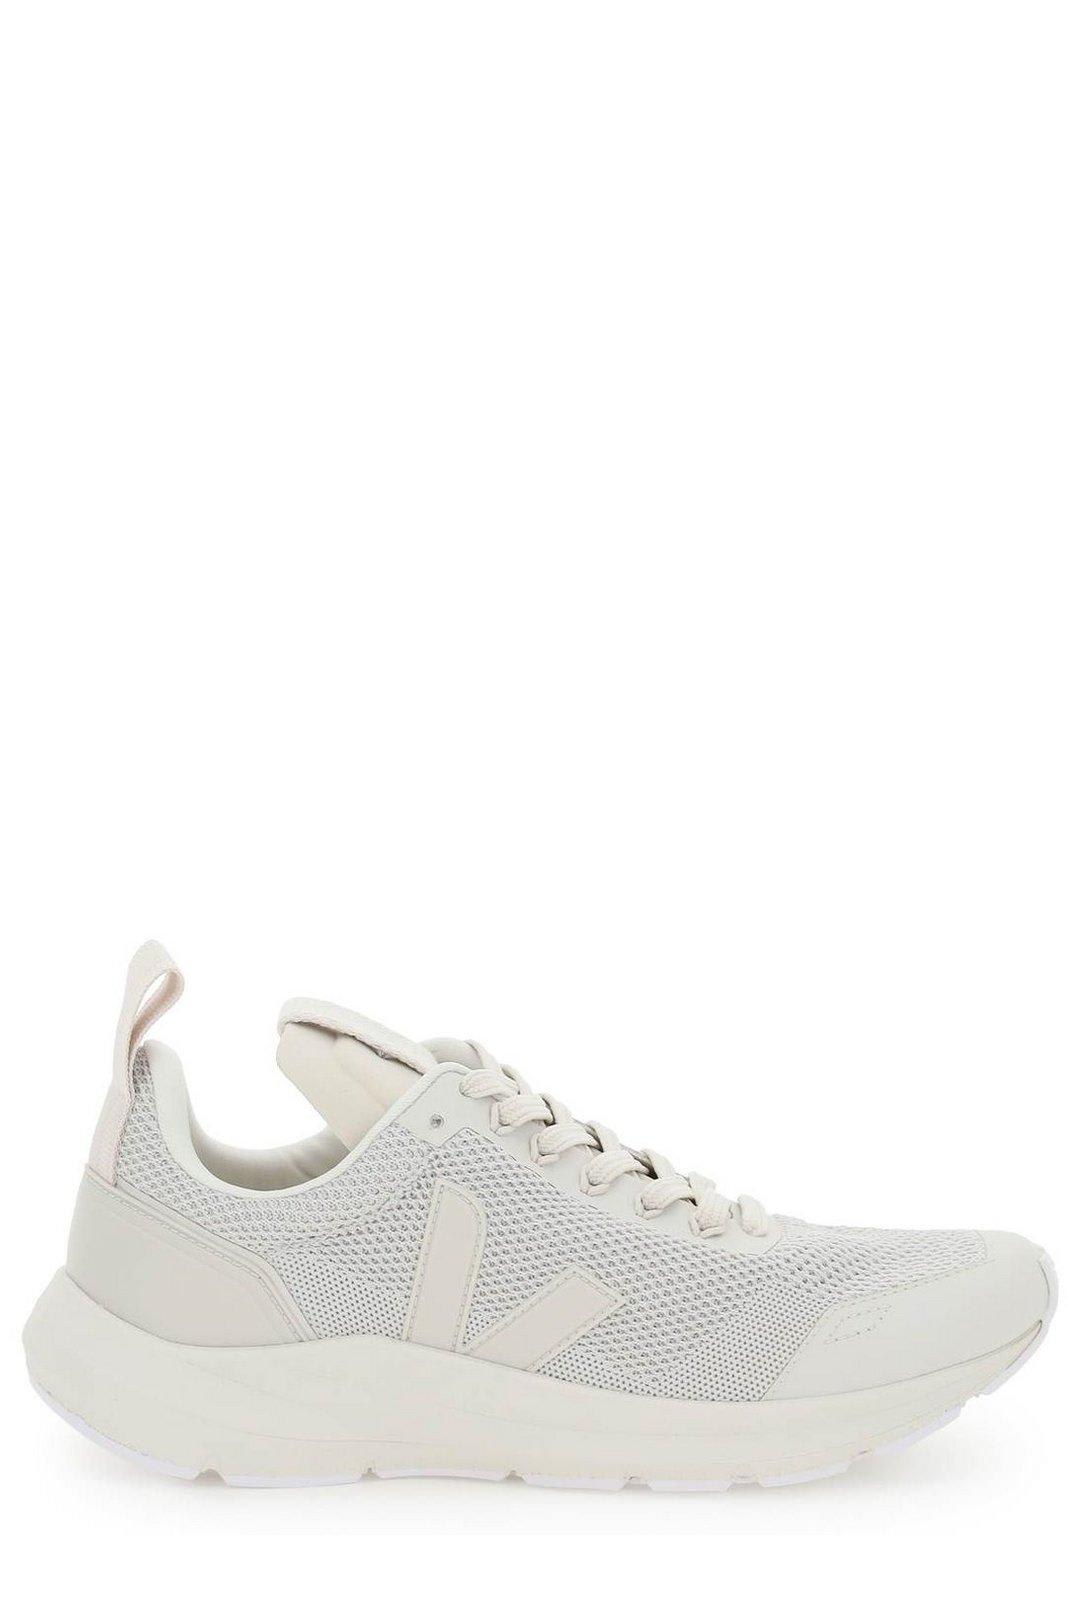 Rick Owens Lace-up Sneakers